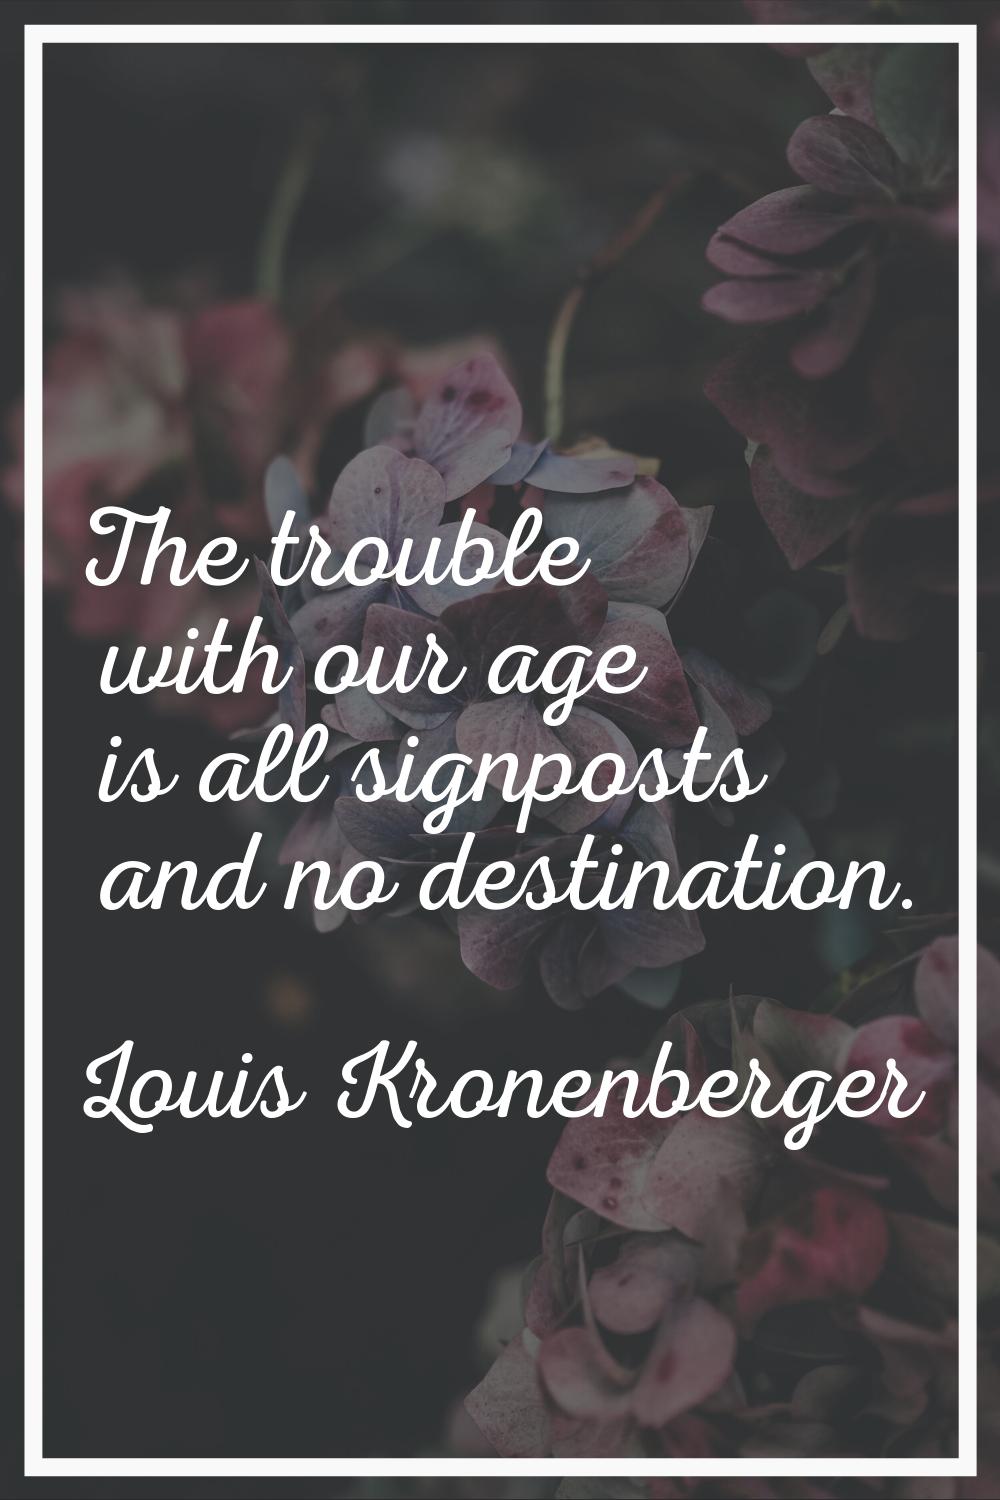 The trouble with our age is all signposts and no destination.